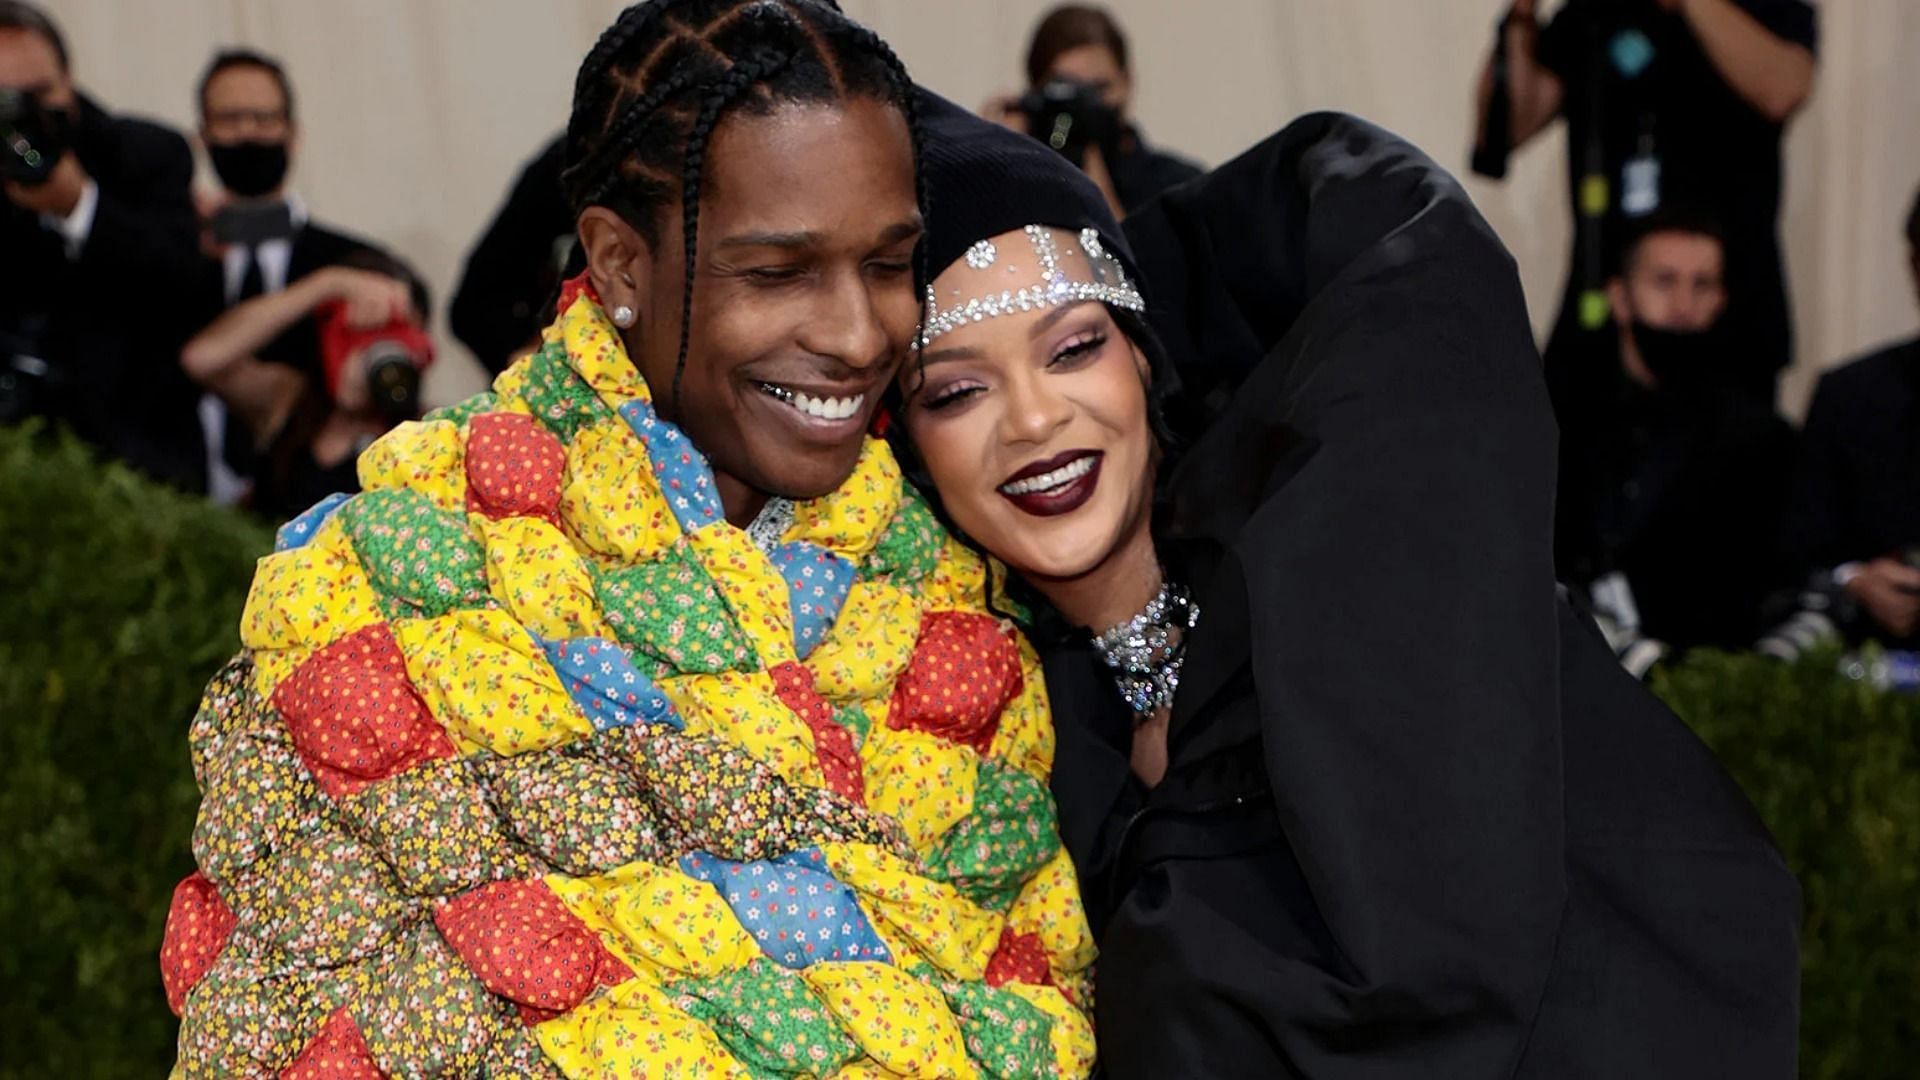 ASAP Rocky released the video of his latest single D.M.B. sparking engagement rumors with pregnant girlfriend Rihanna (Image via Getty Images/Dimitrios Kambouris)